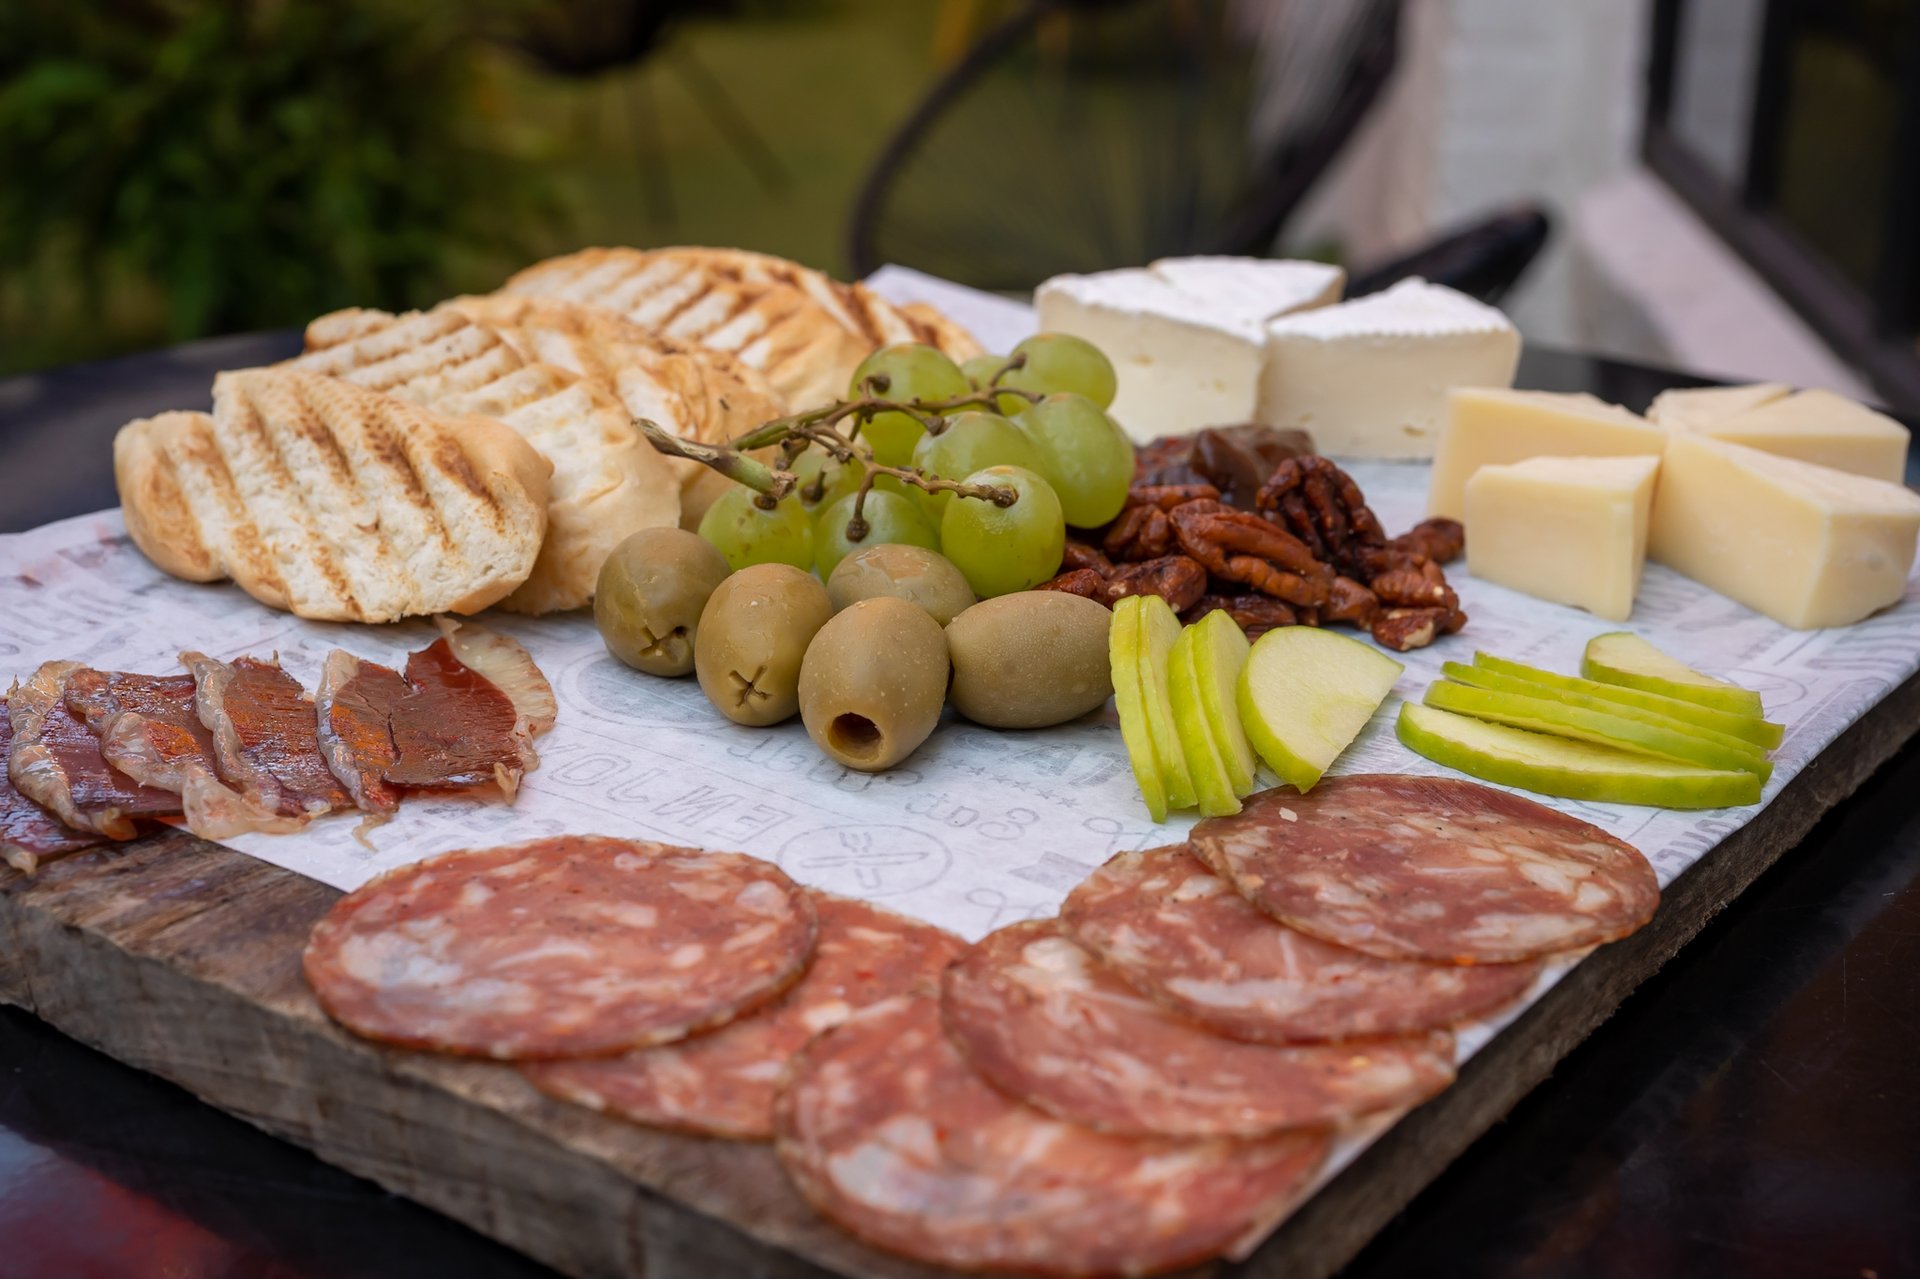 Charcuterie Houston - Luxury Cheese & Charcuterie Boards in Houston TX